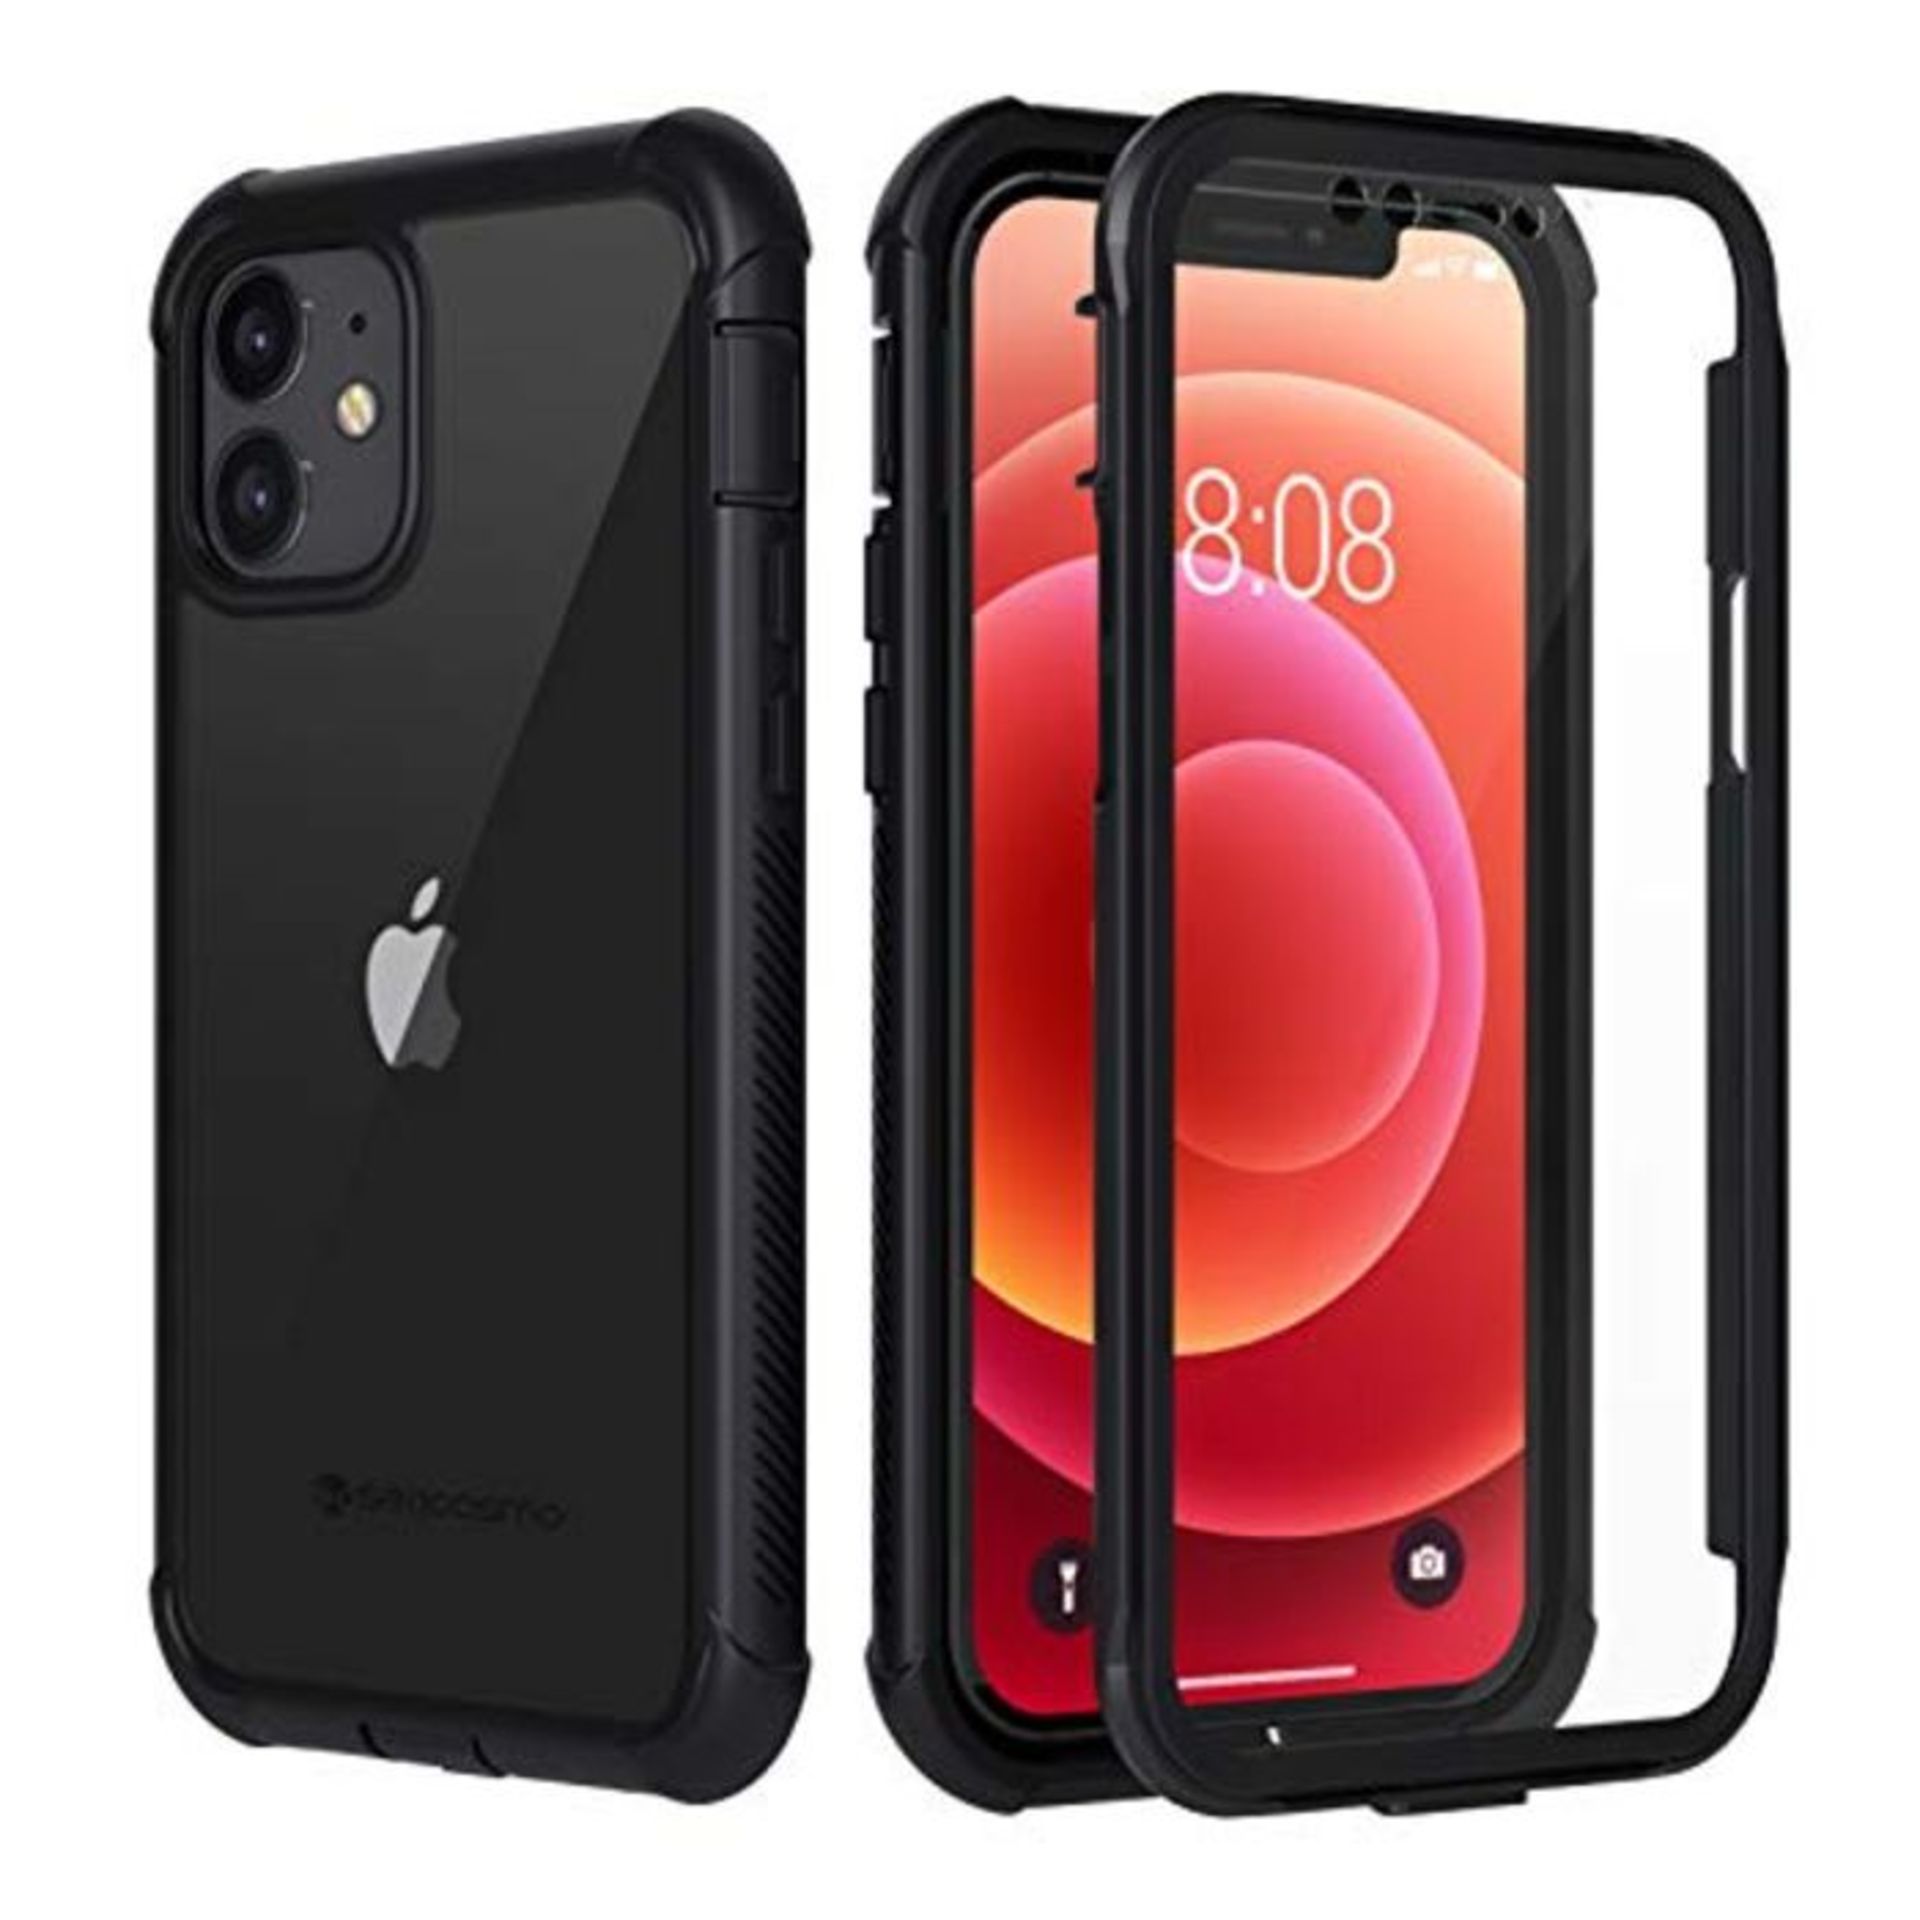 seacosmo iPhone 12 Case, iPhone 12 Pro Case, Full Body Protective Cover with Screen Pr